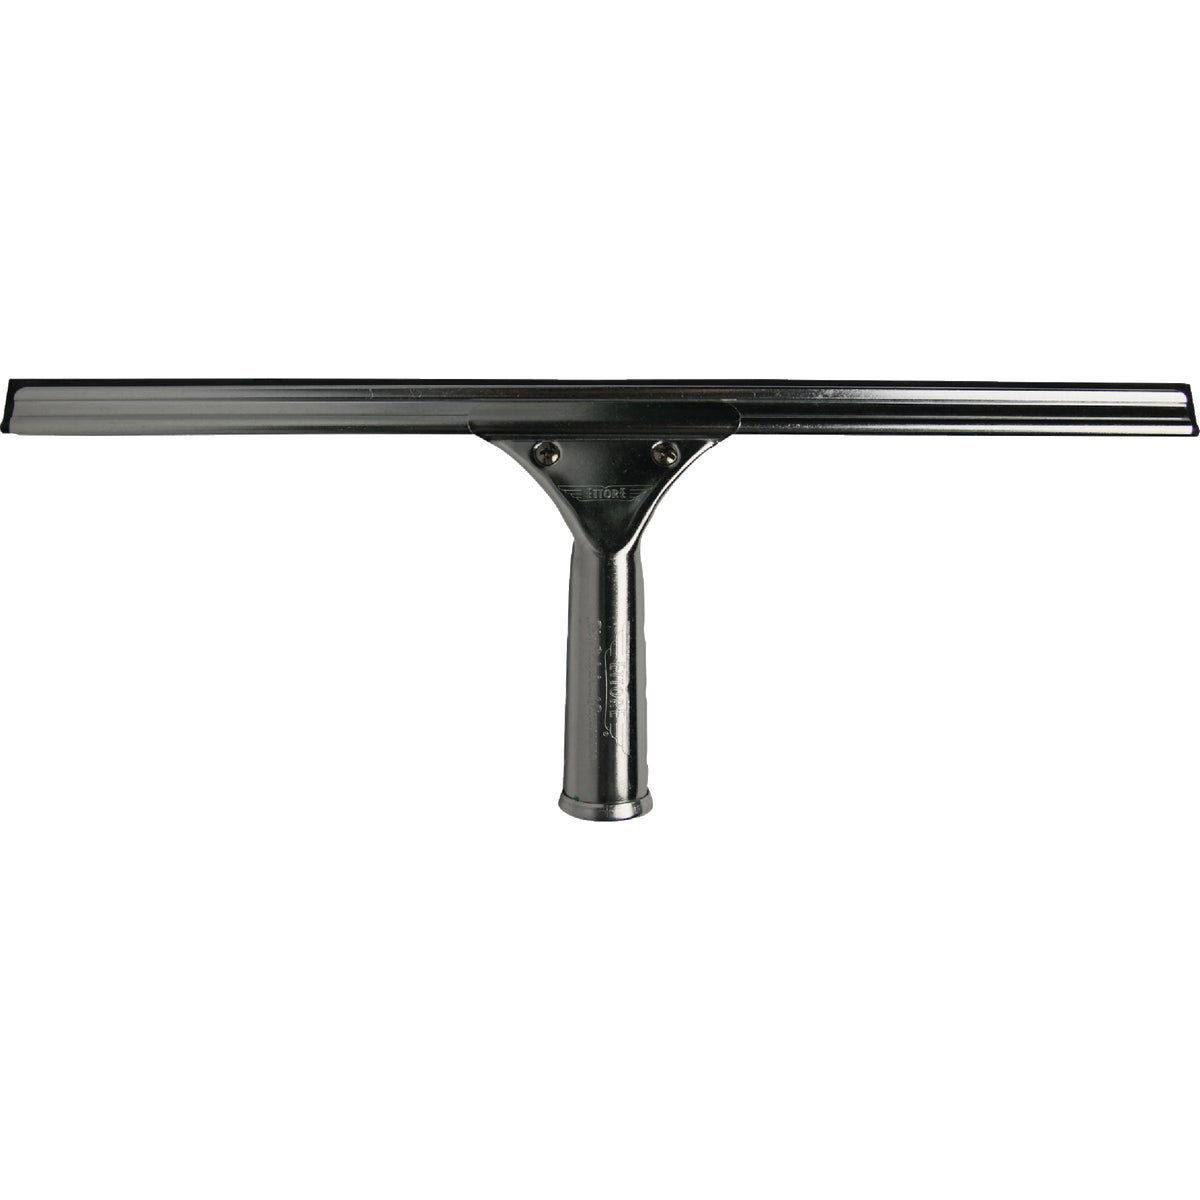 Quality Chemical Company - Squeegee Stainless Steel - Complete